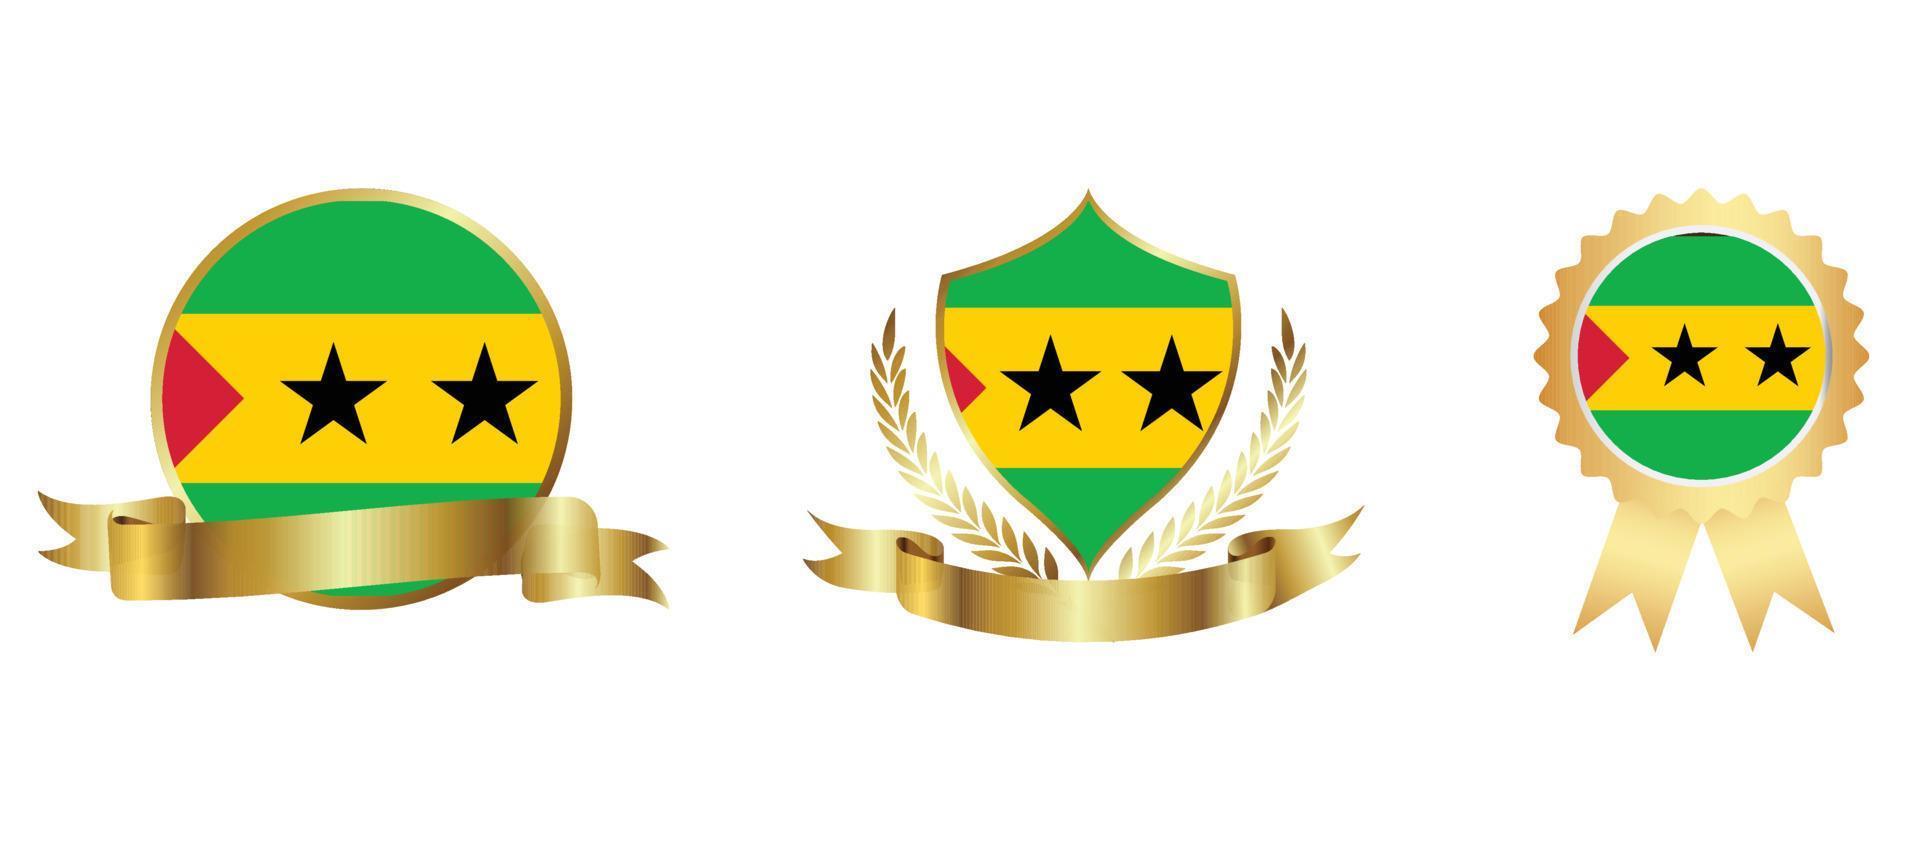 Sao Tome and Principe flag icon . web icon set . icons collection flat. Simple vector illustration.